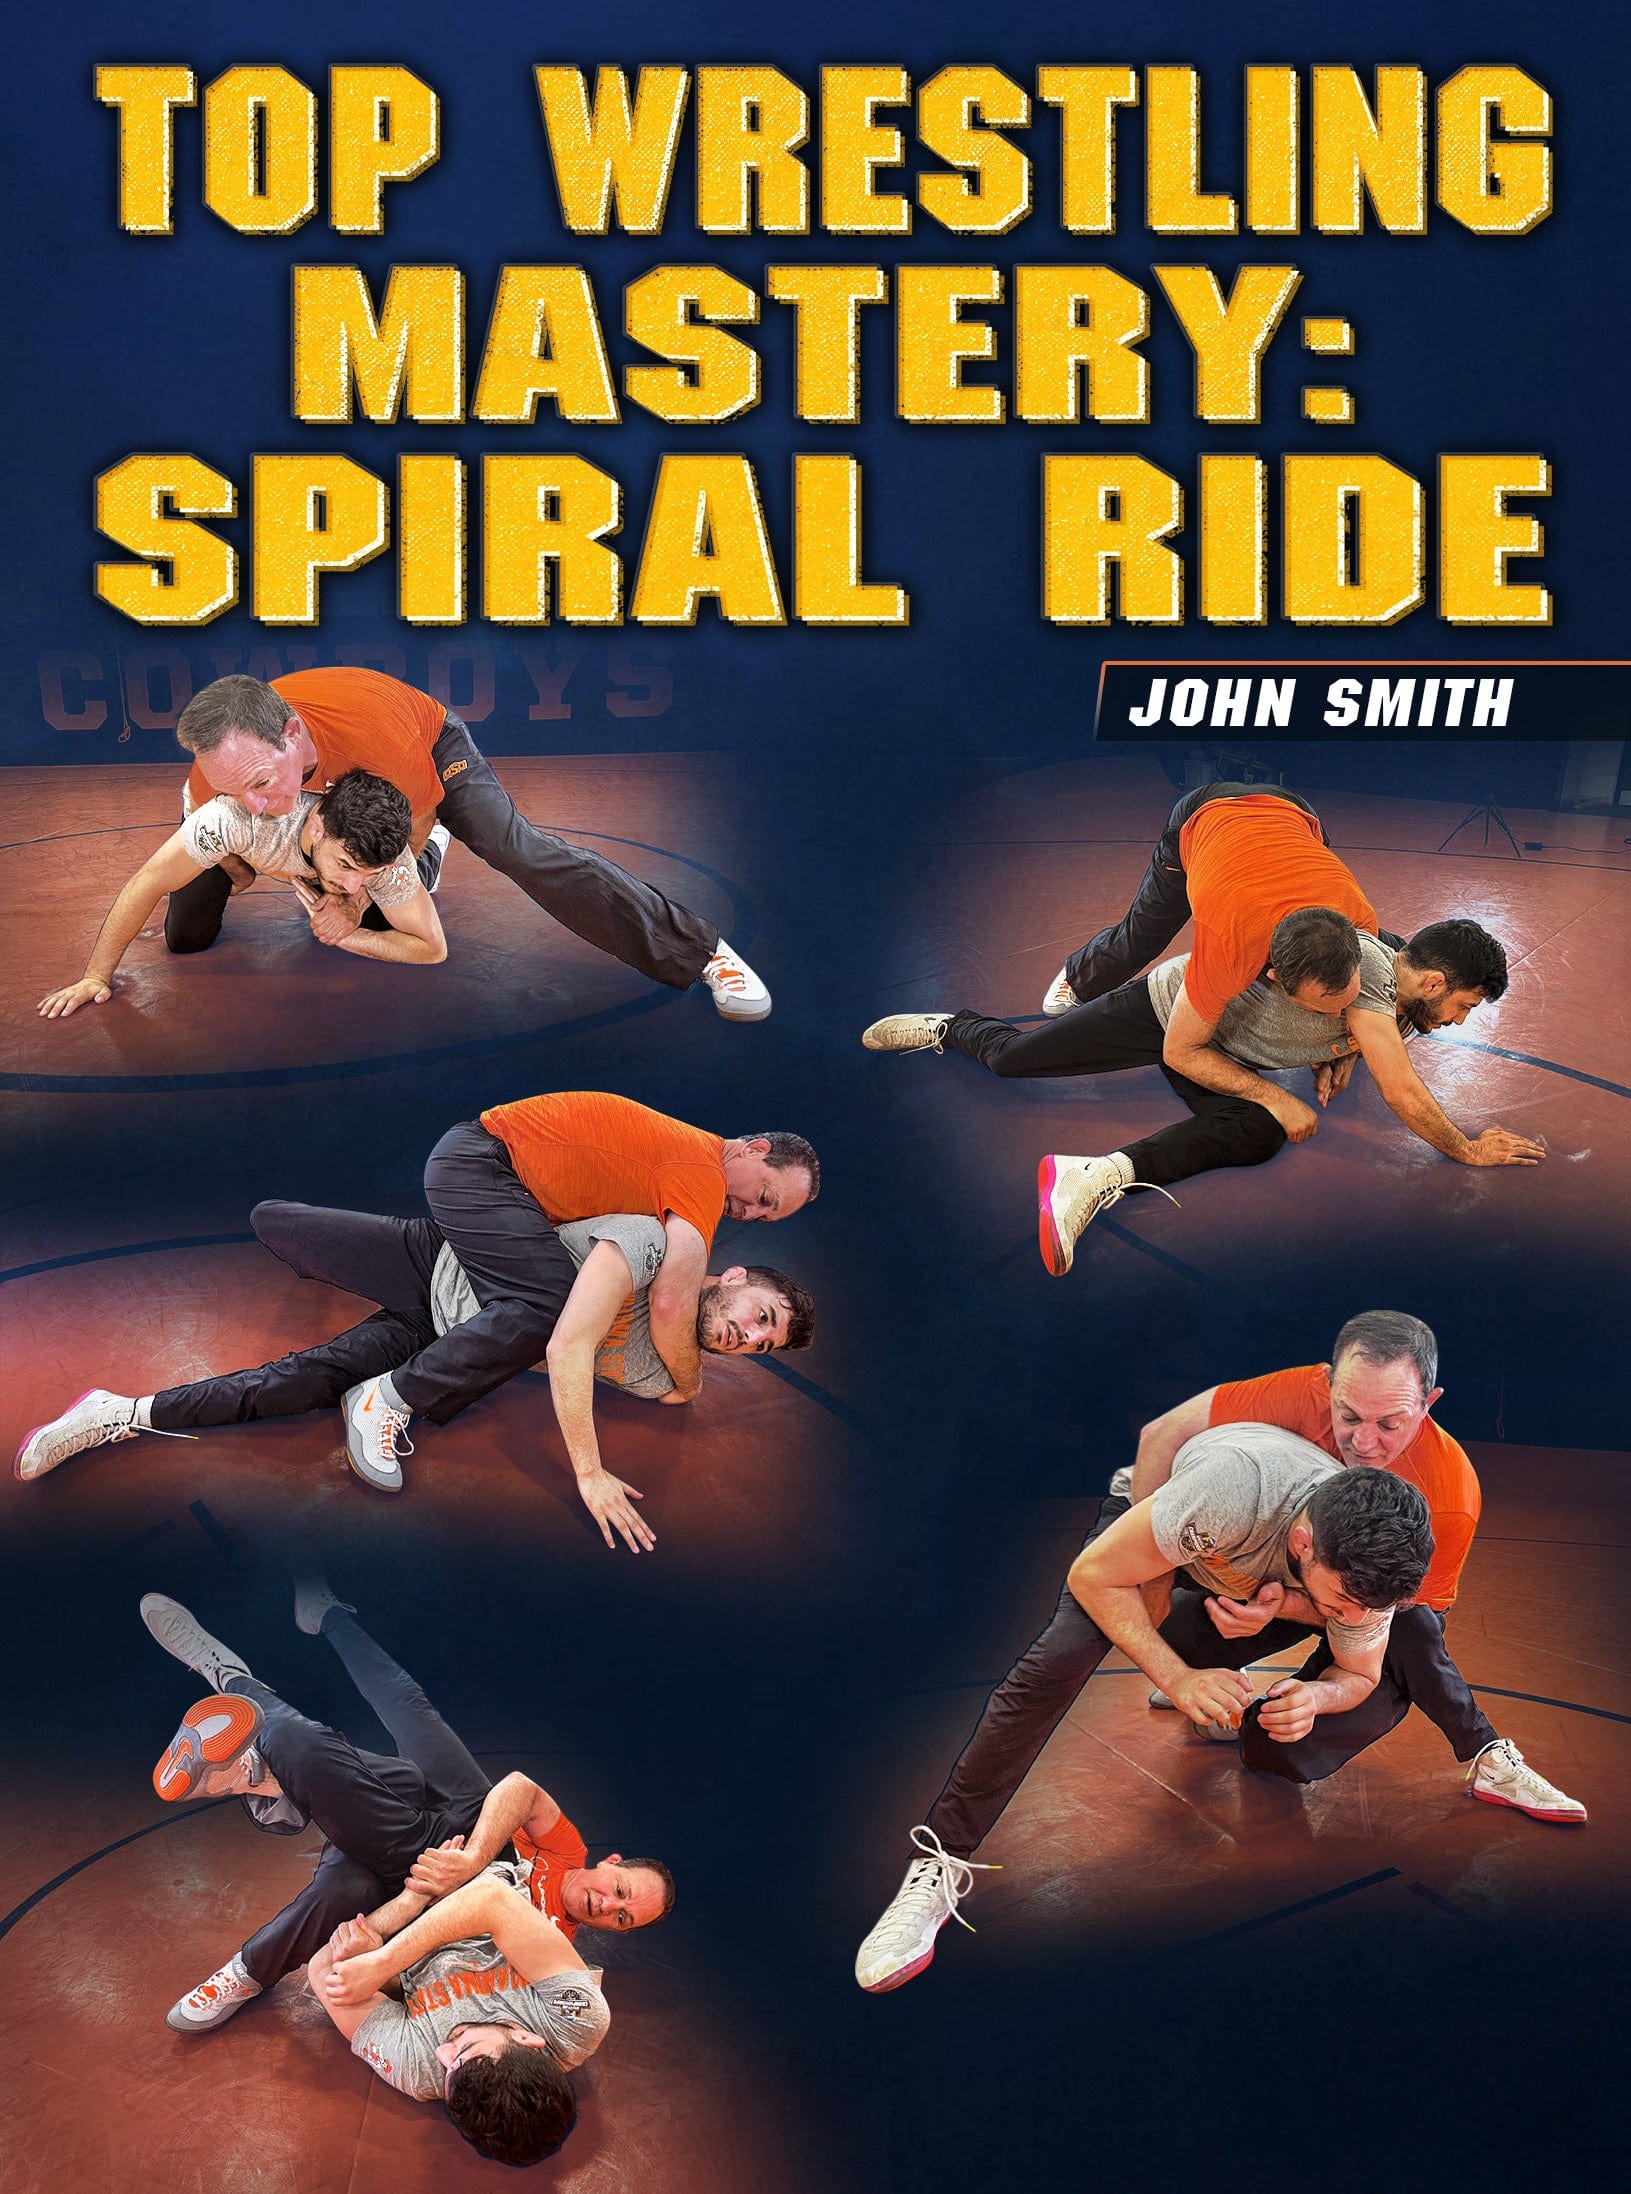 Top Wrestling Mastery: Spiral Ride by John Smith - Fanatic Wrestling